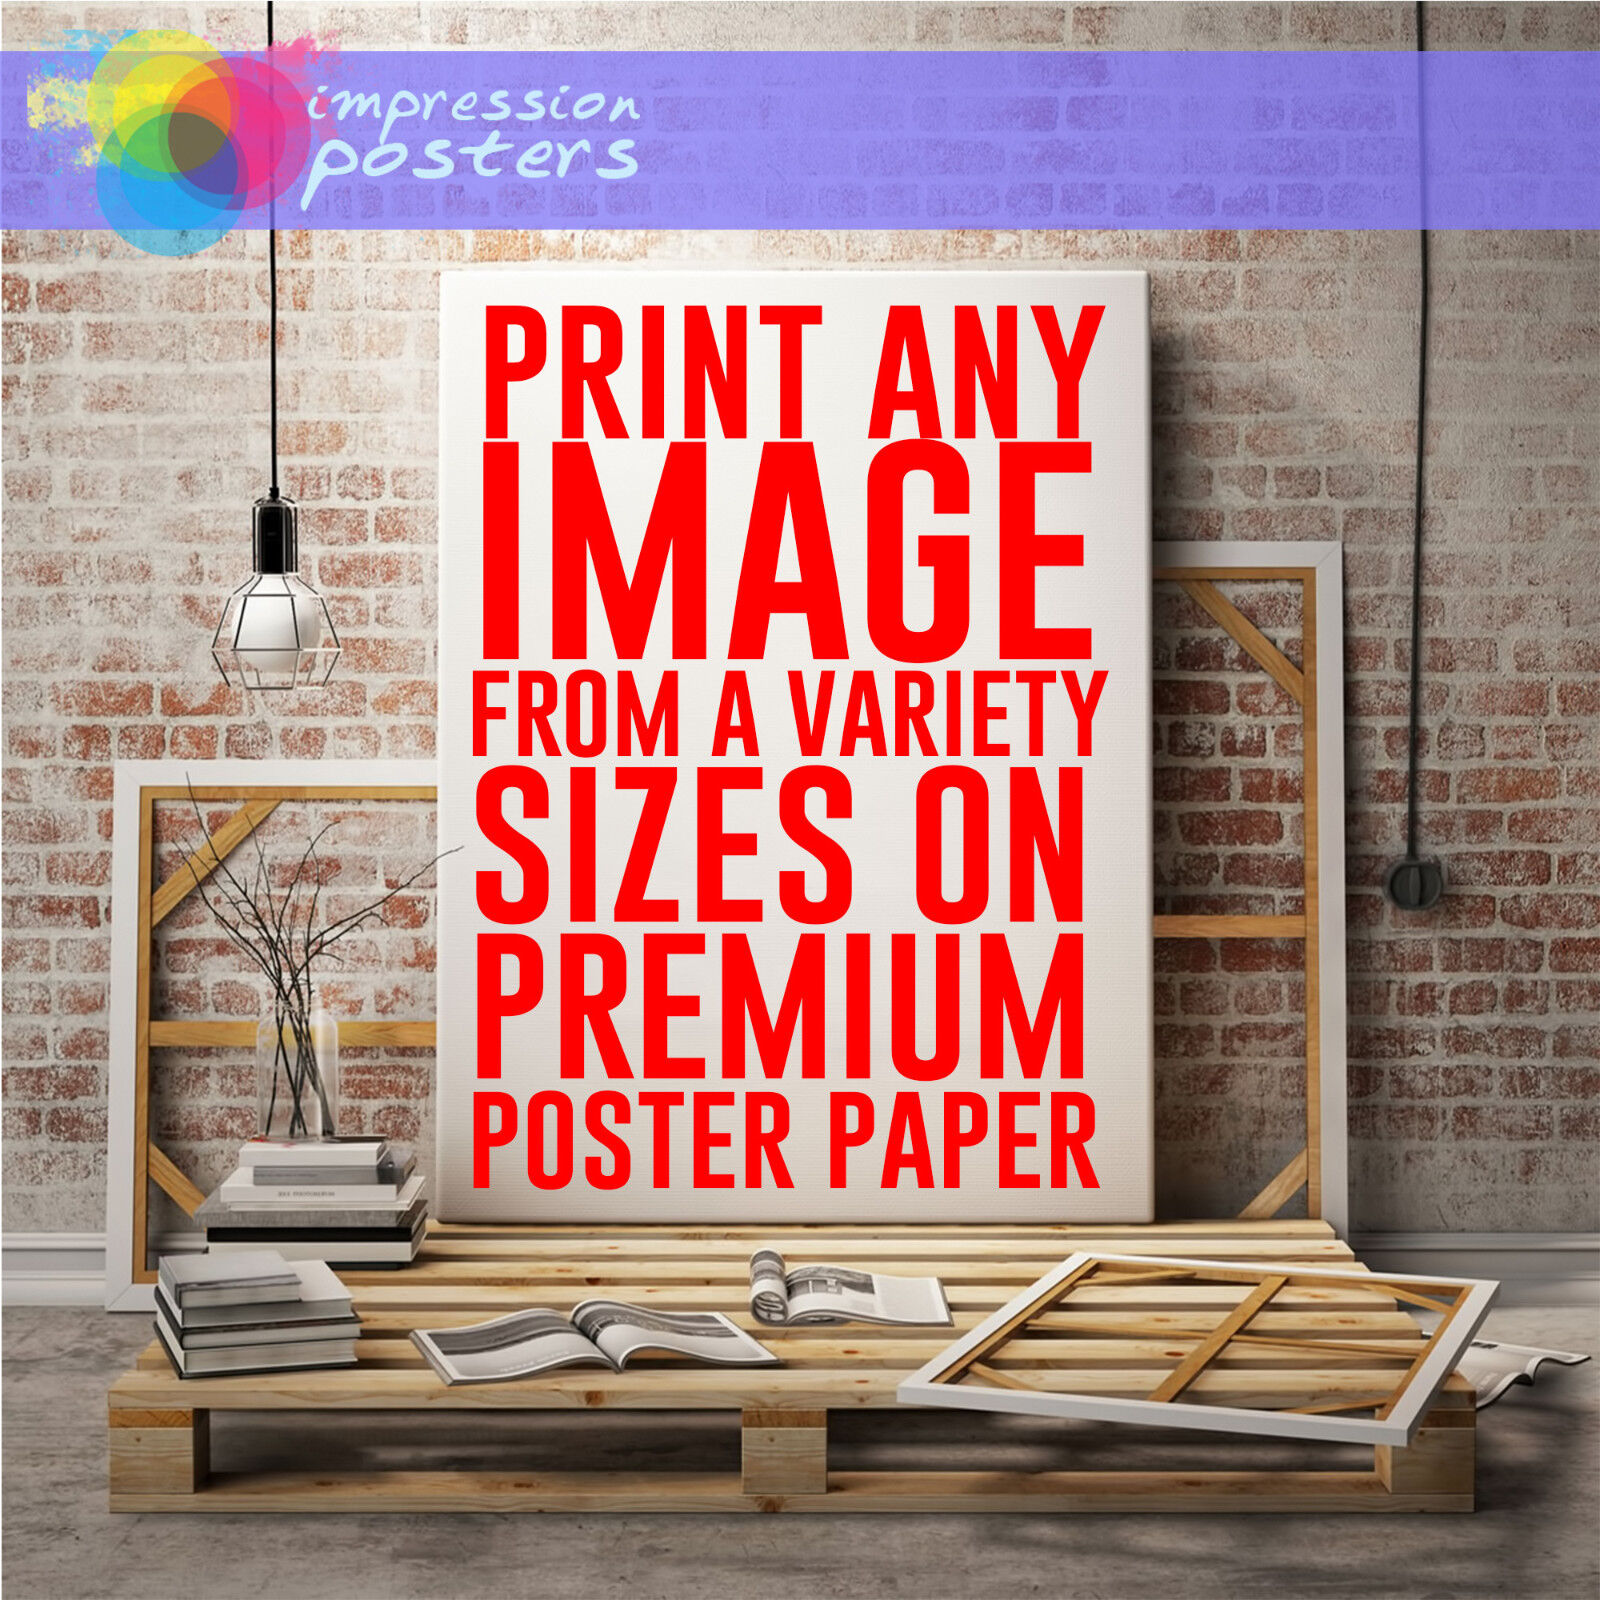 CUSTOM POSTER SIZES PRINTS PRINT YOUR OWN IMAGES PHOTOS ARTWORK ON PREMIUM PAPER